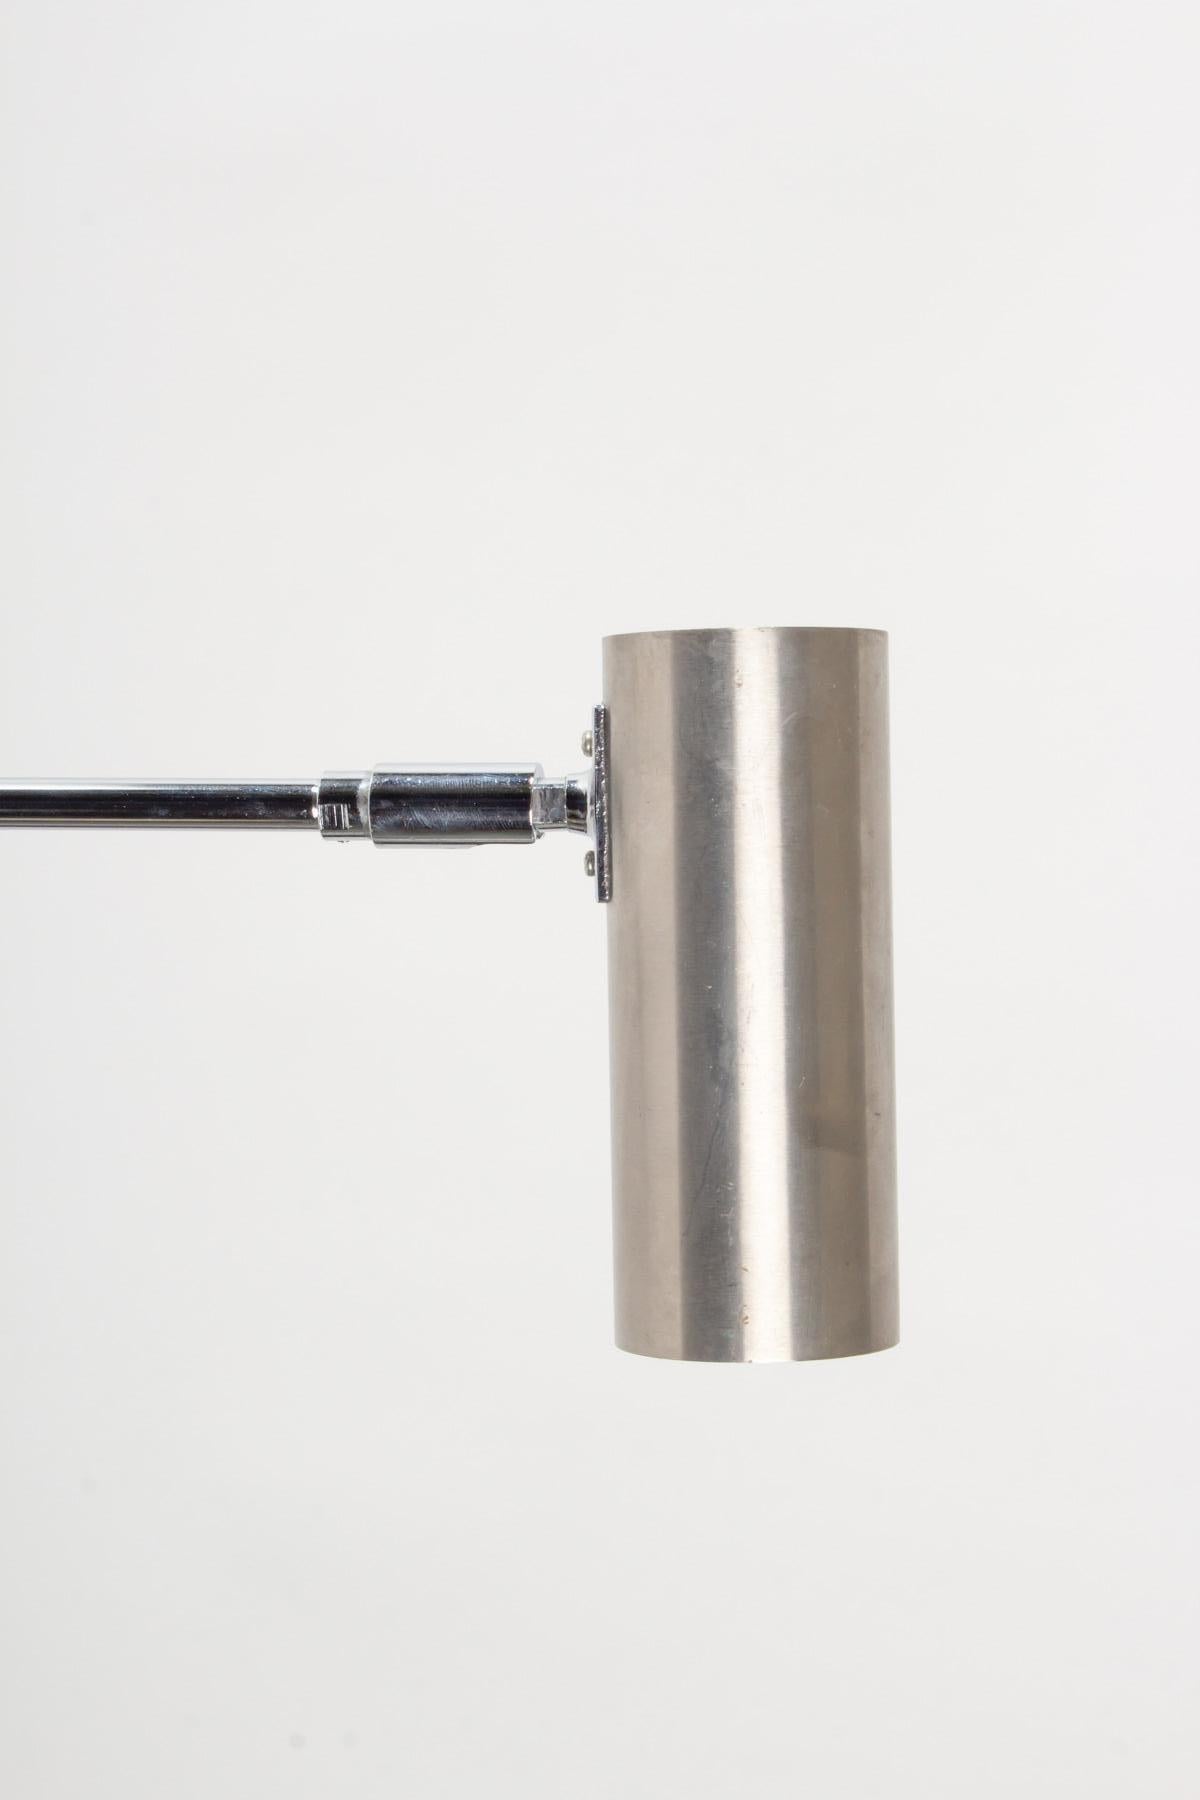 Composed of a round wall support on which is placed a long rod ending with a rotating cylinder acting as a light source allowing to position it at your convenience, all in silver chrome. 
Designed in the 1960's by Jean Rene Caillette for the Pascot